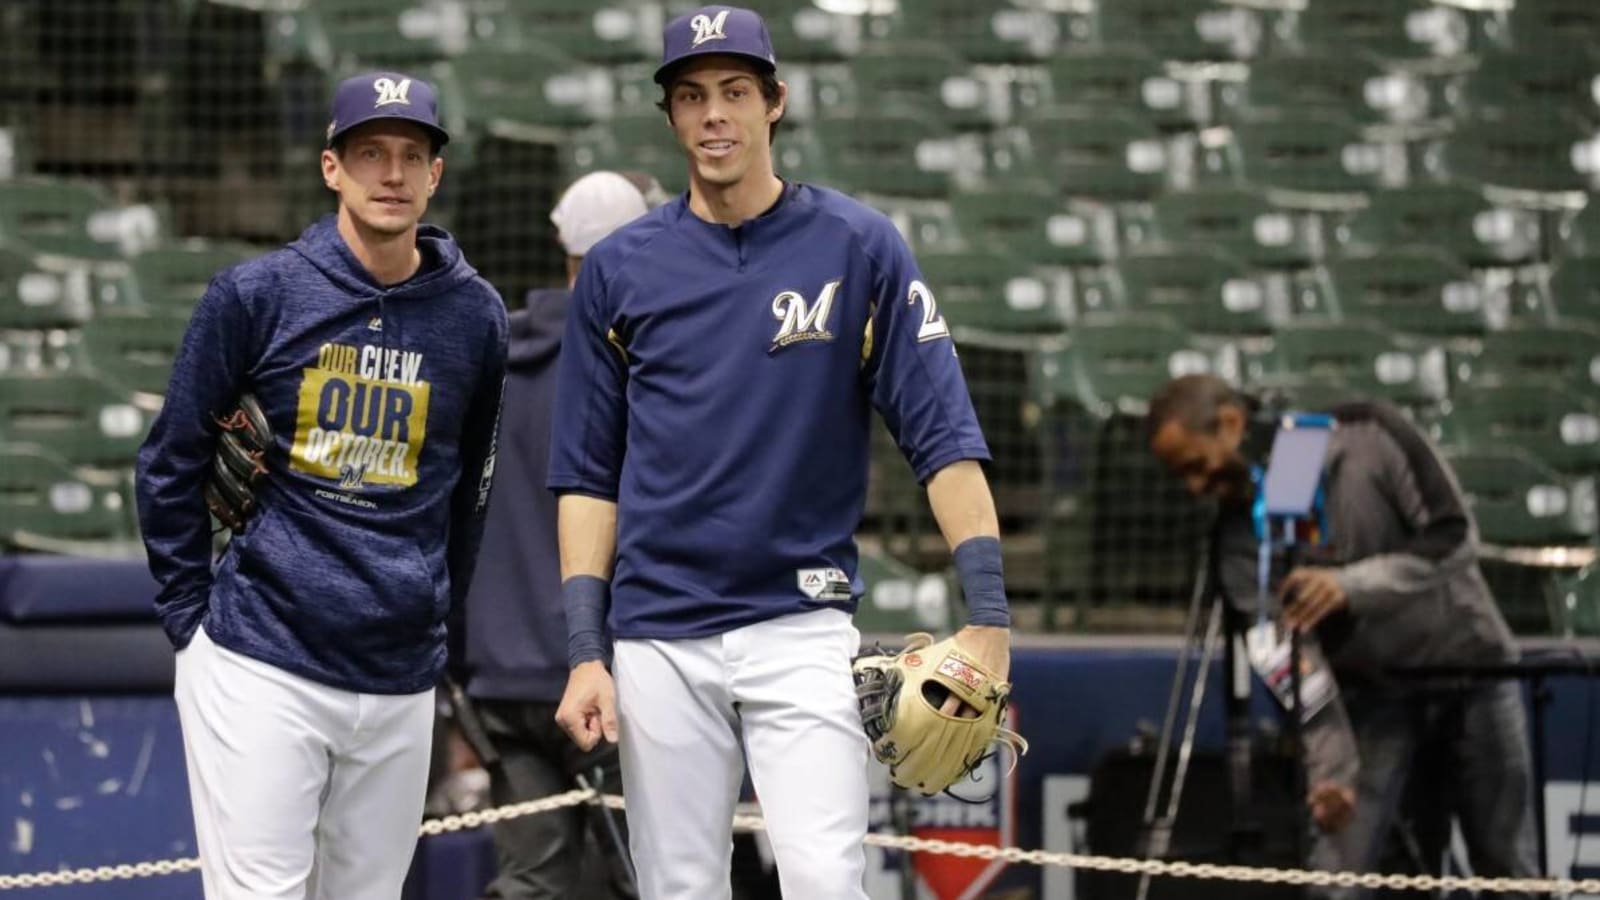 What to know about Milwaukee Brewers manager Craig Counsell